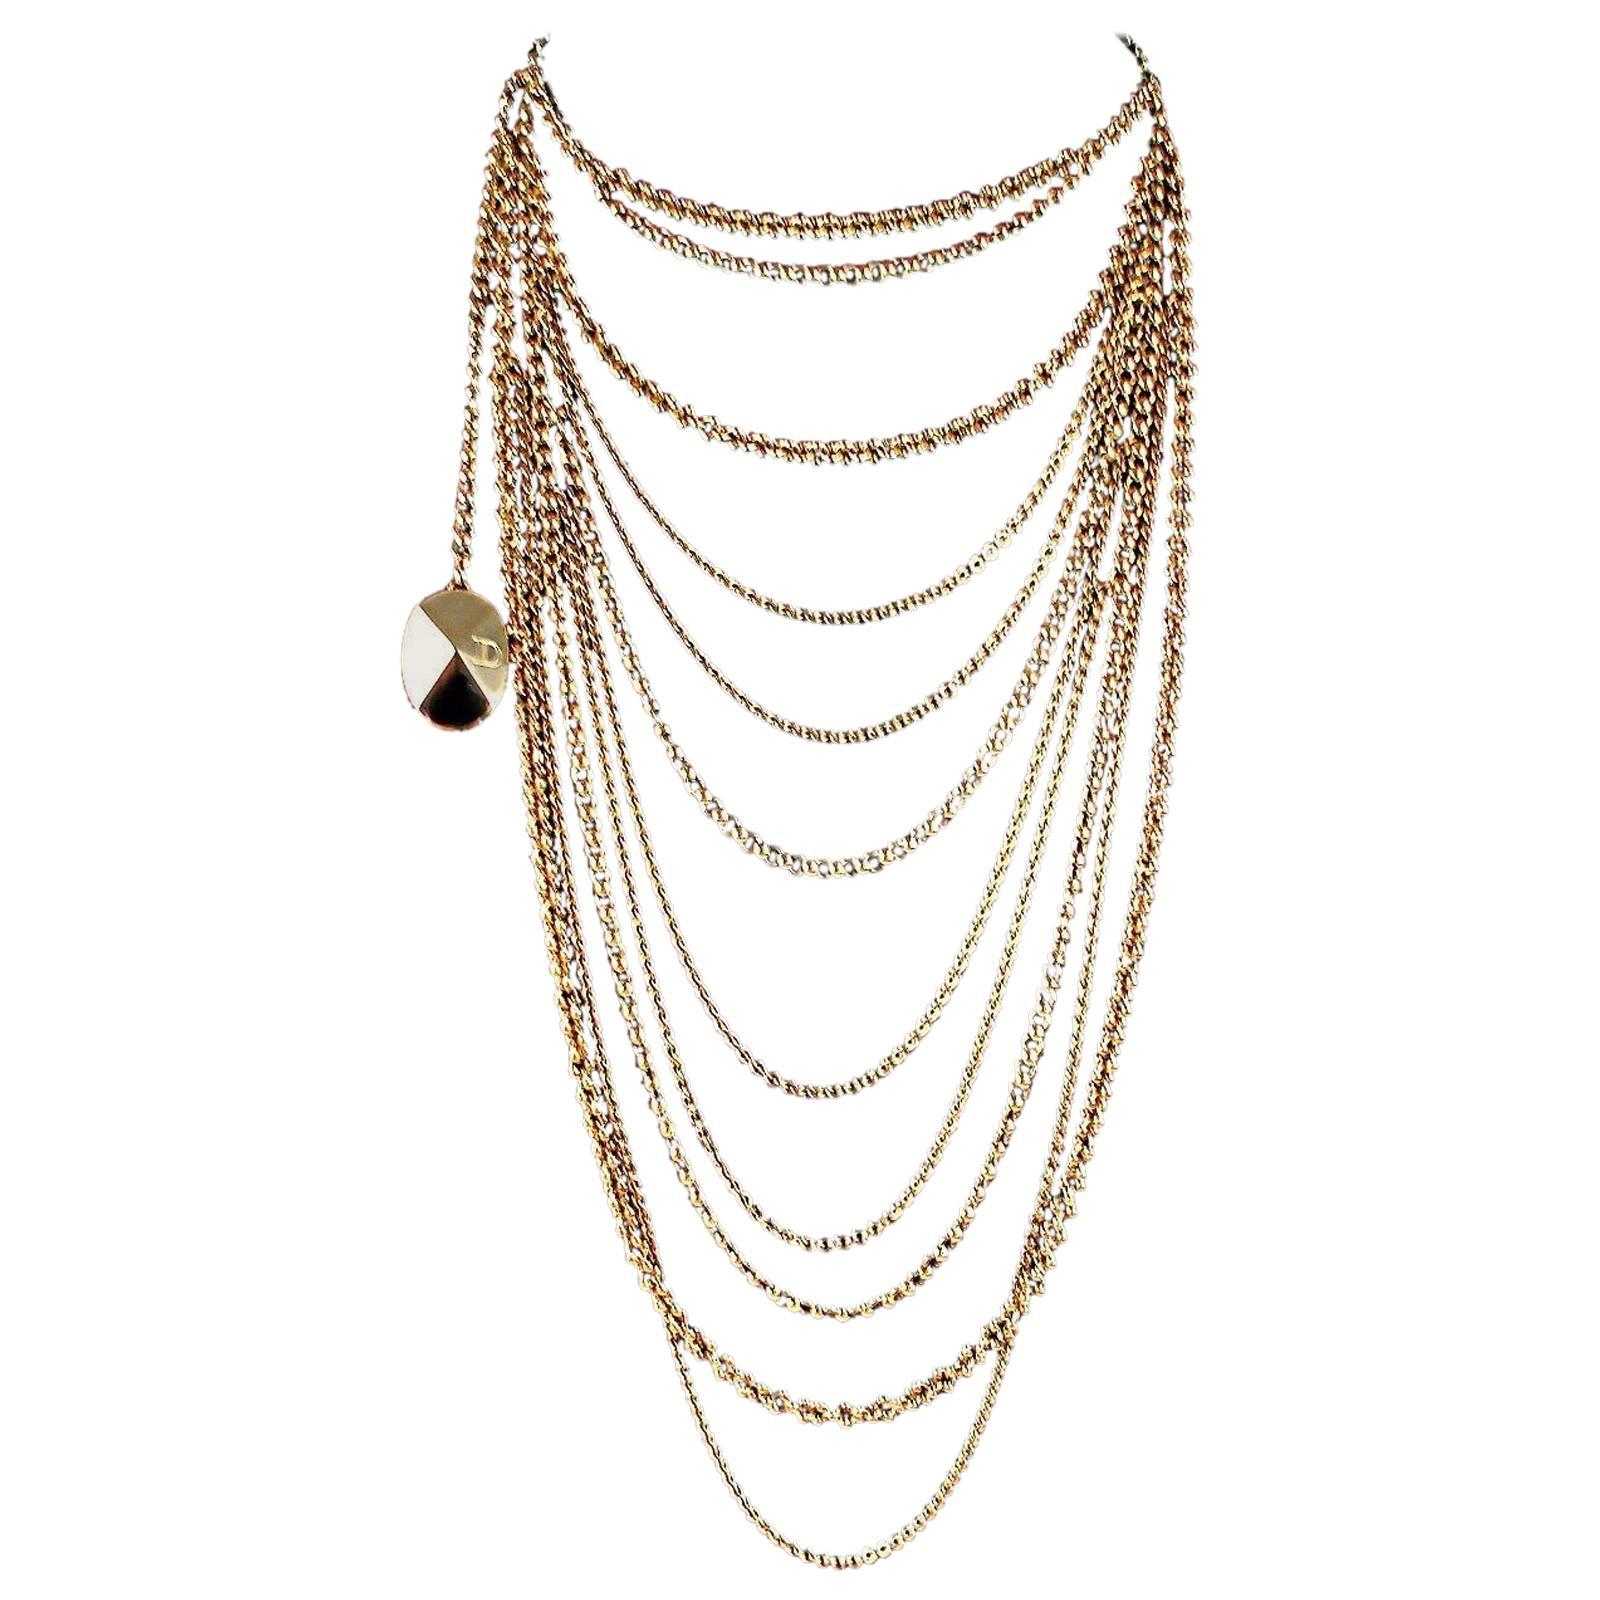 Christian Dior Necklace - Multistrand Gold Layered Chain Logo Choker Charm Pearl